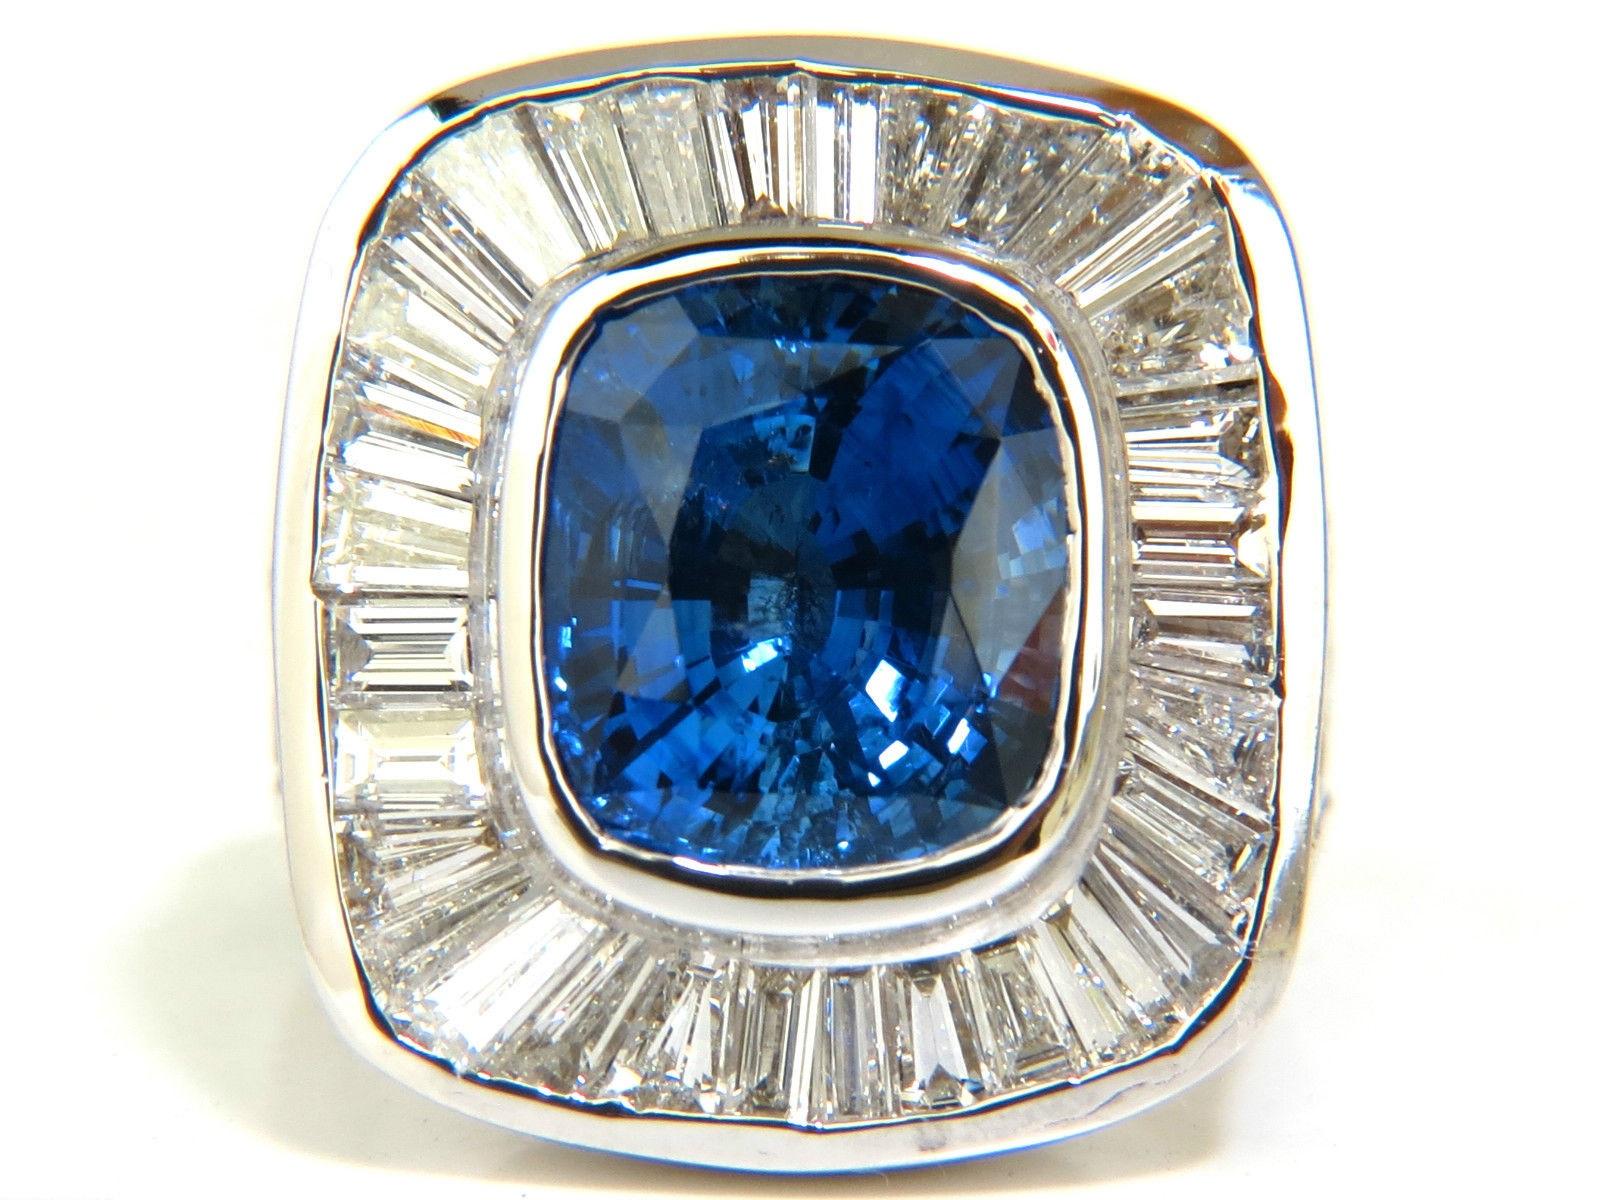 ONLY MAGNIFICENT INVESTMENT JEWELS


8.02ct. GIA certified Natural Sapphire
Amazing Cushion cut

Very Very Clean Clarity

Beautiful Blue sparkles throughout

The classic cornflower color

11.89 X 10.18 X 7.46mm

Transparency A+

GIA: 